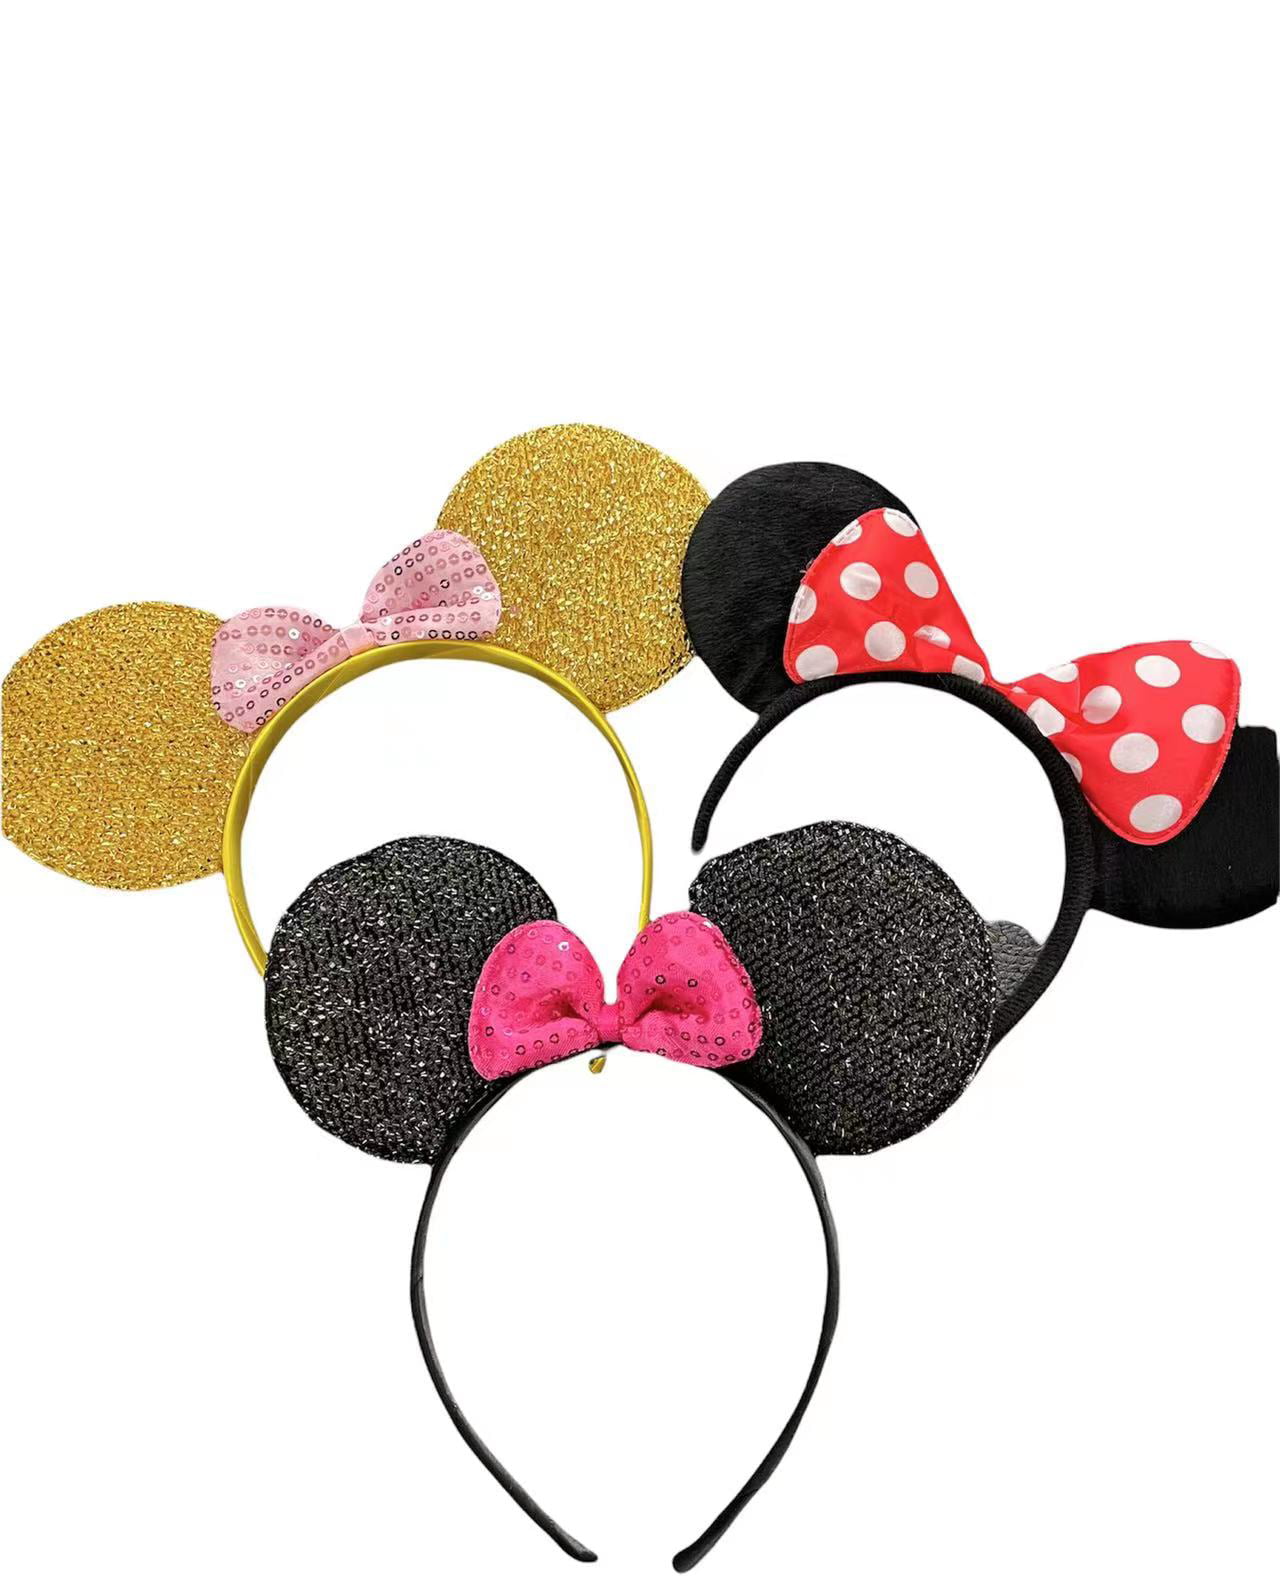 24 Minnie Mickey Mouse Ears Headbands Black Shiny Red Pink Bows Party Birthday 